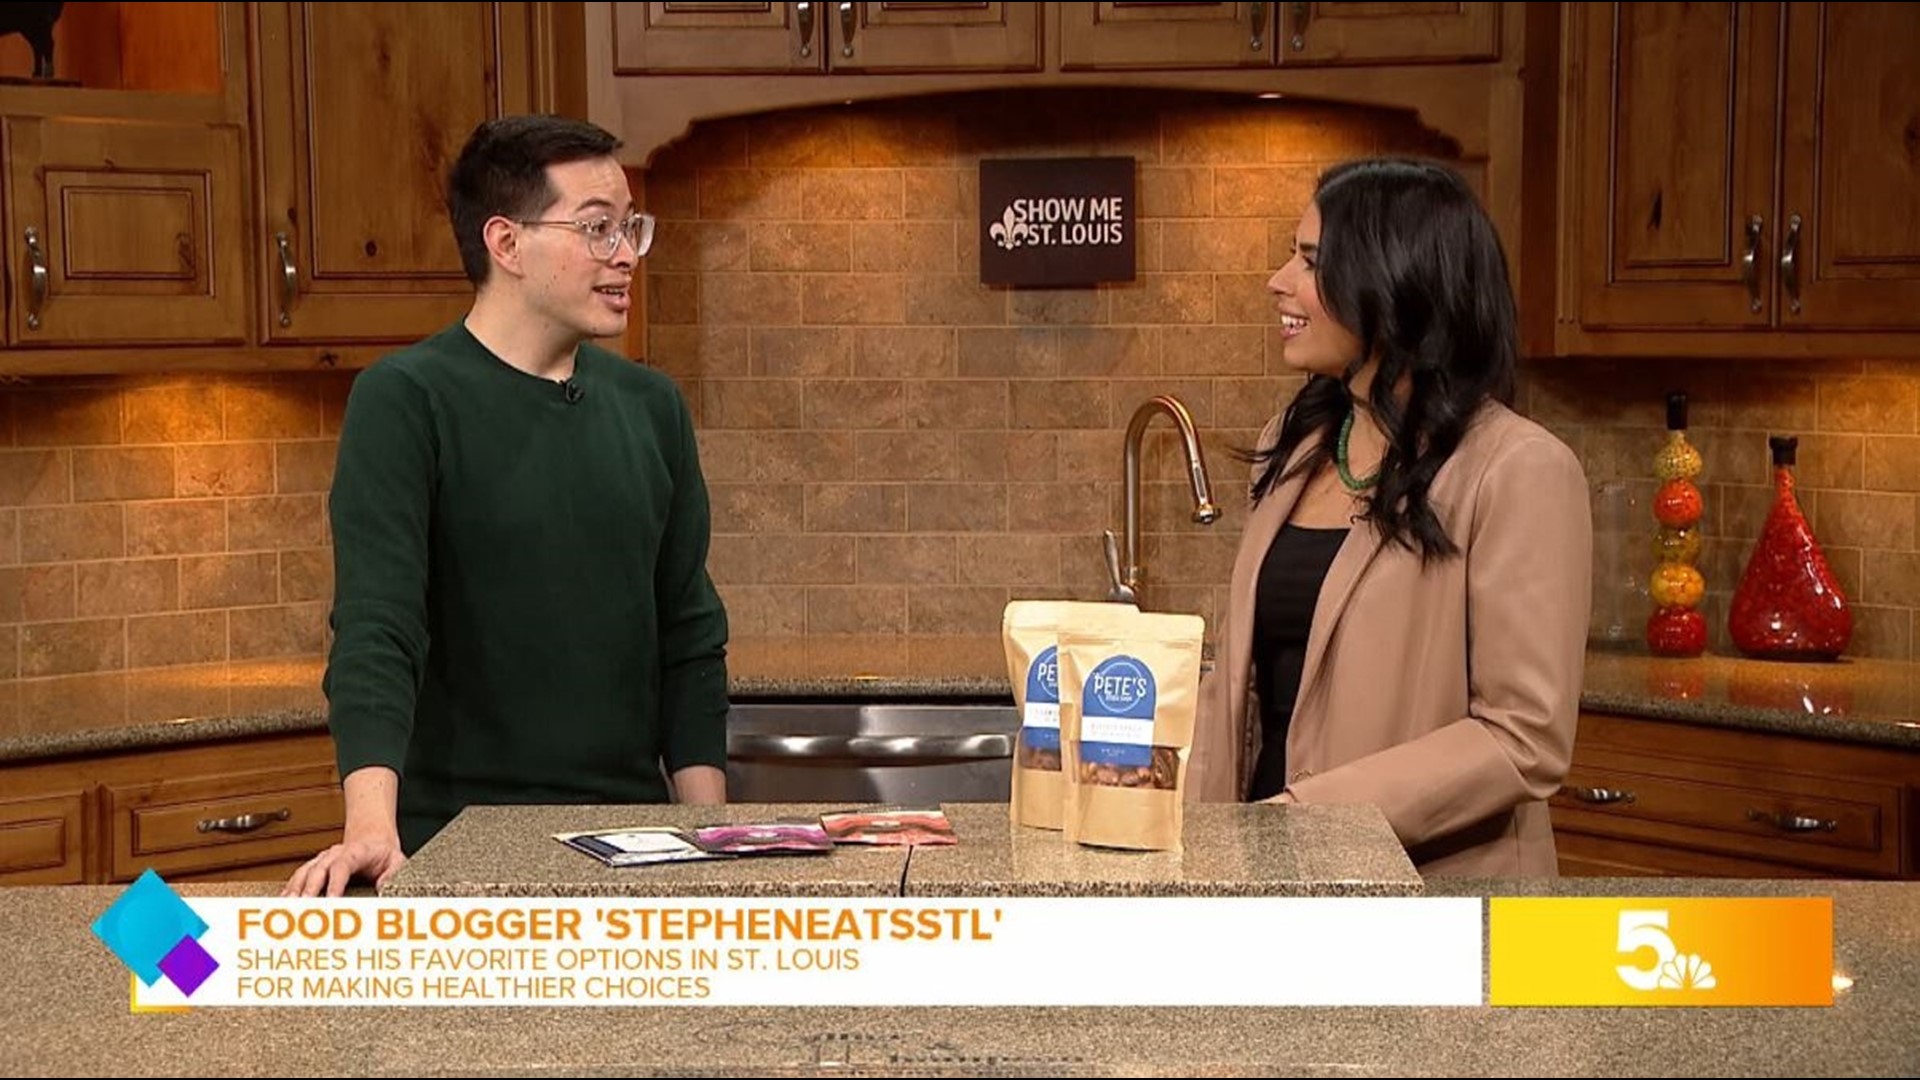 Local foodie, Stephen Deaderick, joined Dana DiPiazza Friday morning in the Show Me kitchen to share his top healthy eating options in the area.